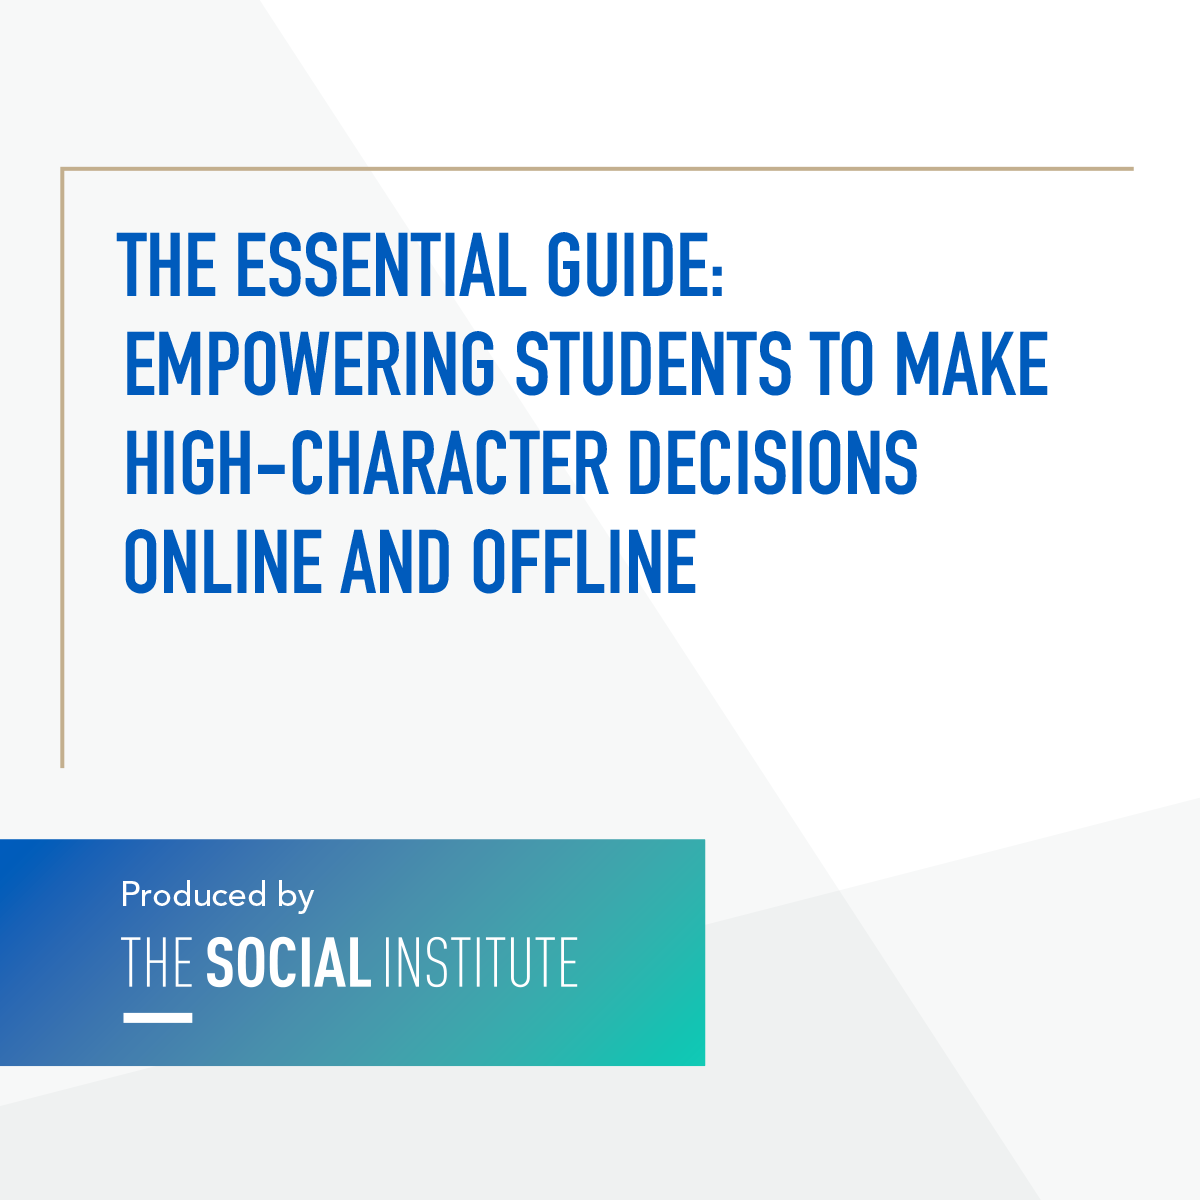 The Essential Guide to Empowering Students to Make High-Character Decisions Online and Offline